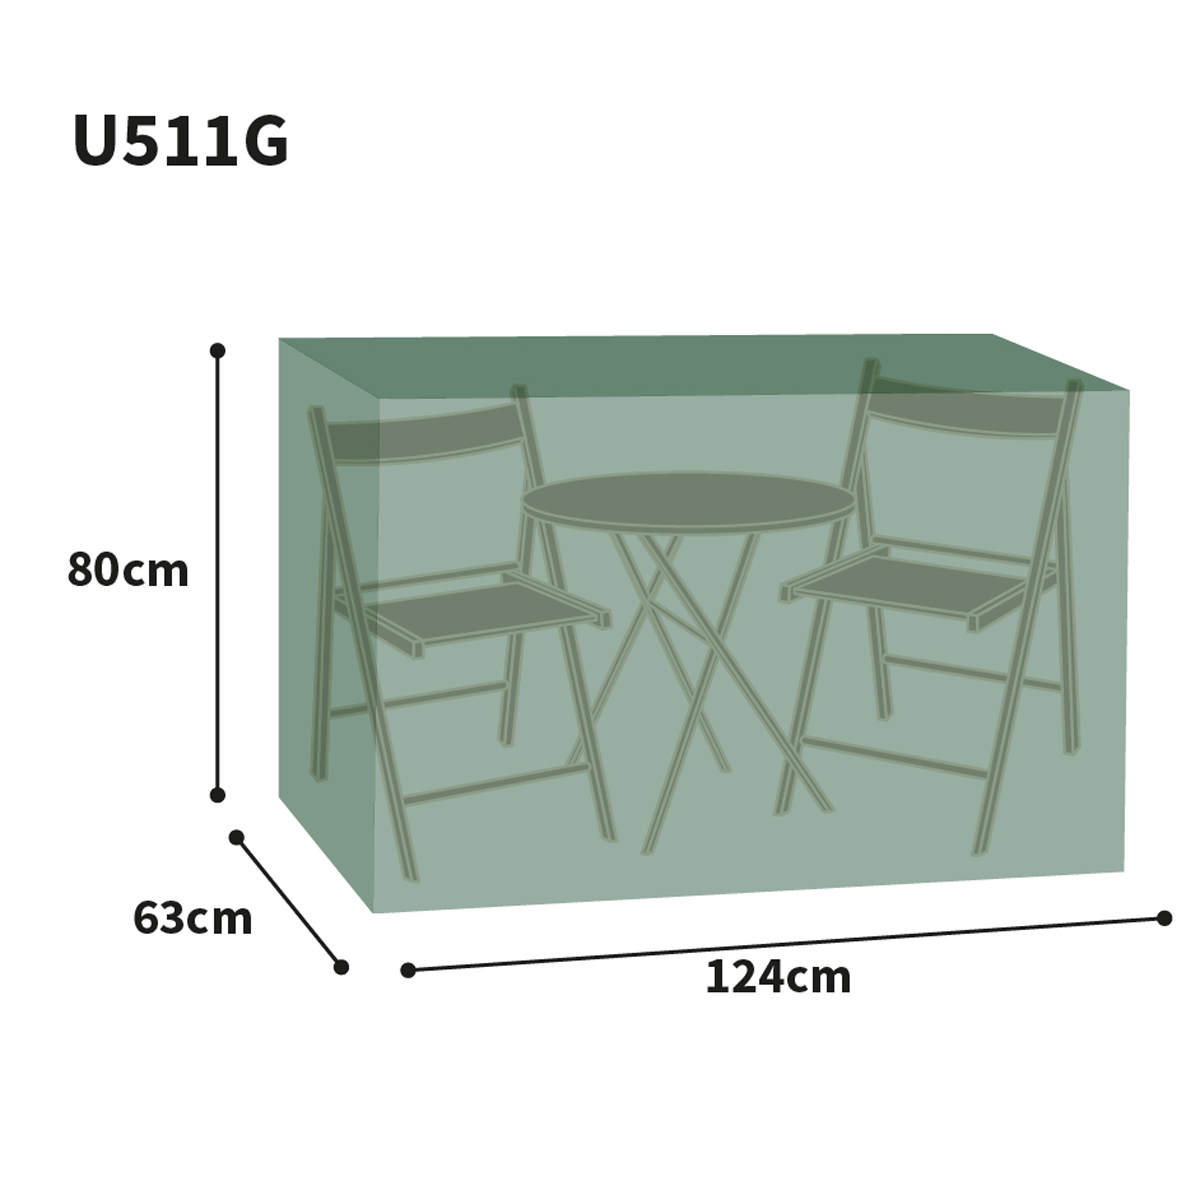 Bosmere Ultimate Protector Bistro Set Cover Graphic Size Guide